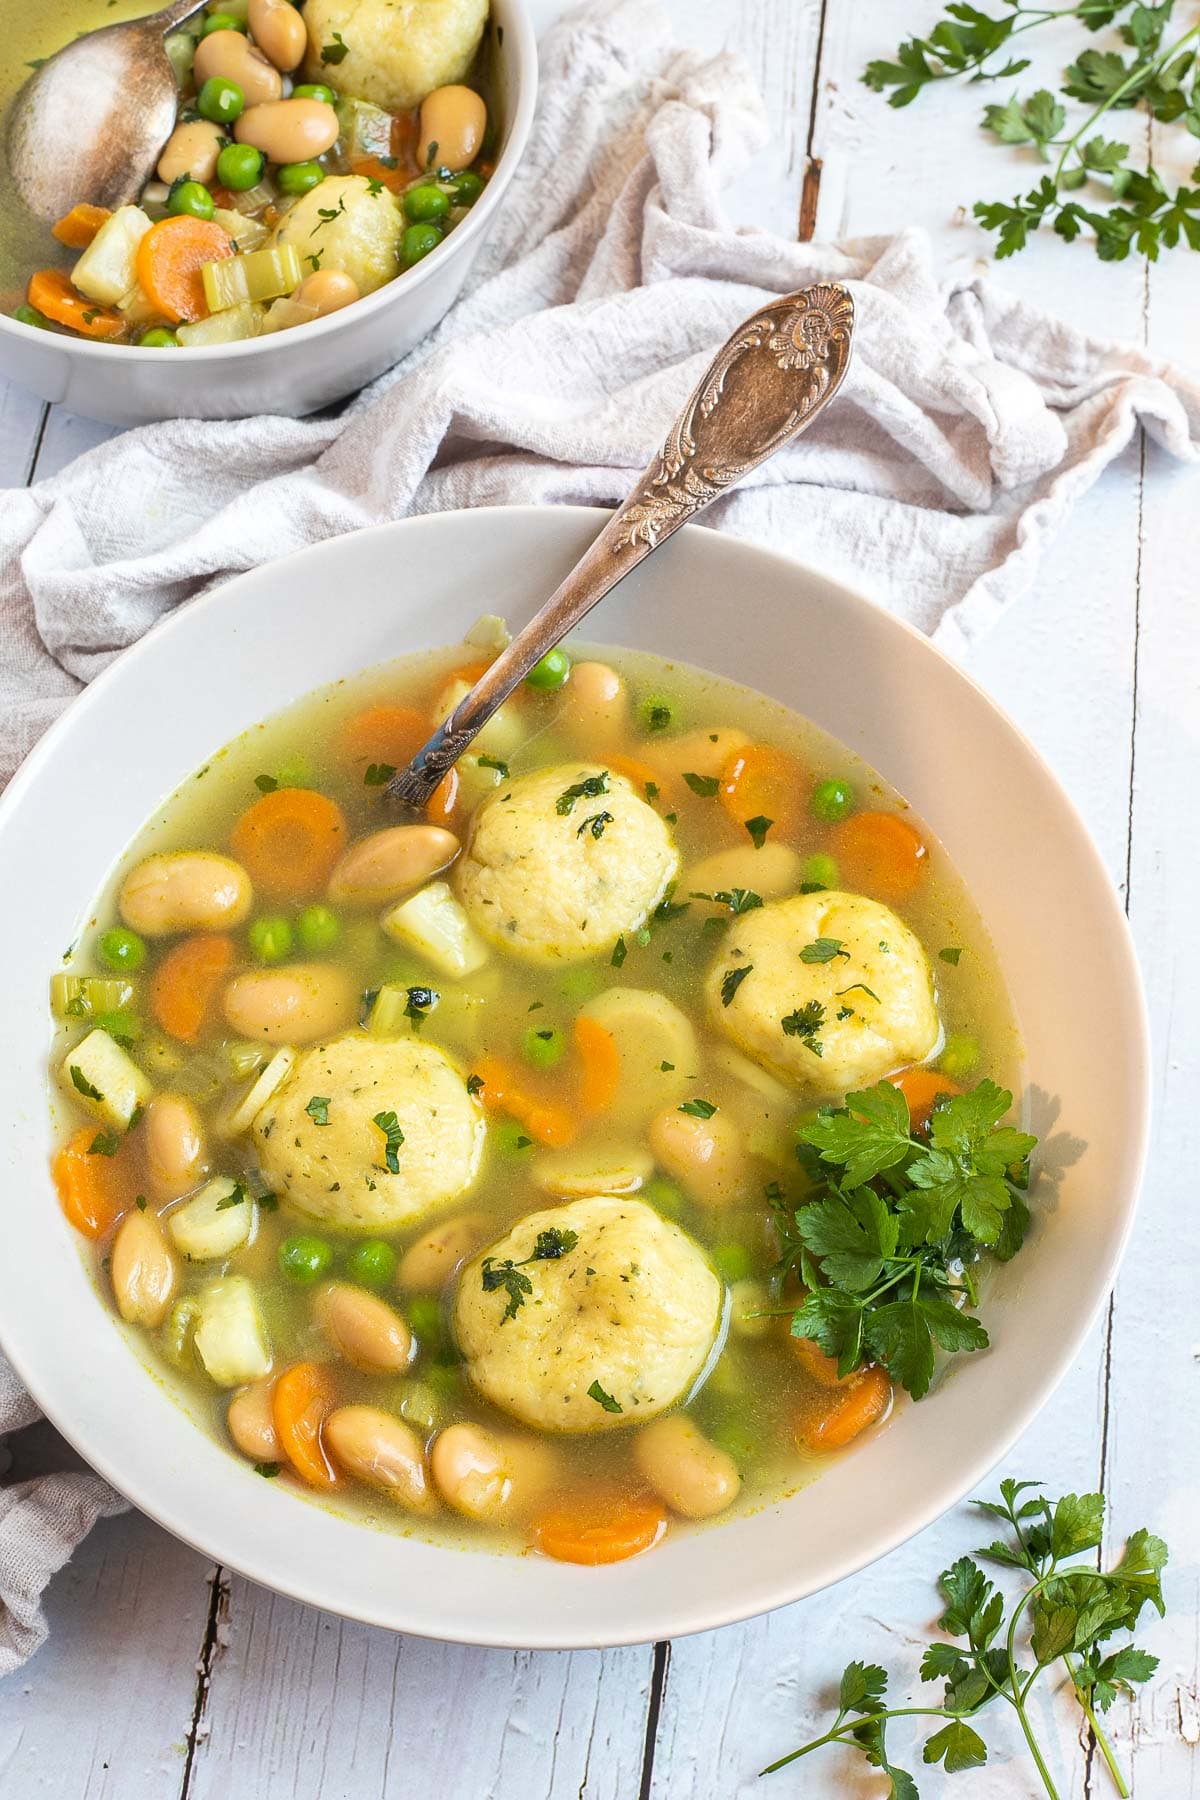 Two white plates with dumplings, chopped veggies, green herbs, white beans, and green peas in a vegetable broth soup. A spoon is placed in it.